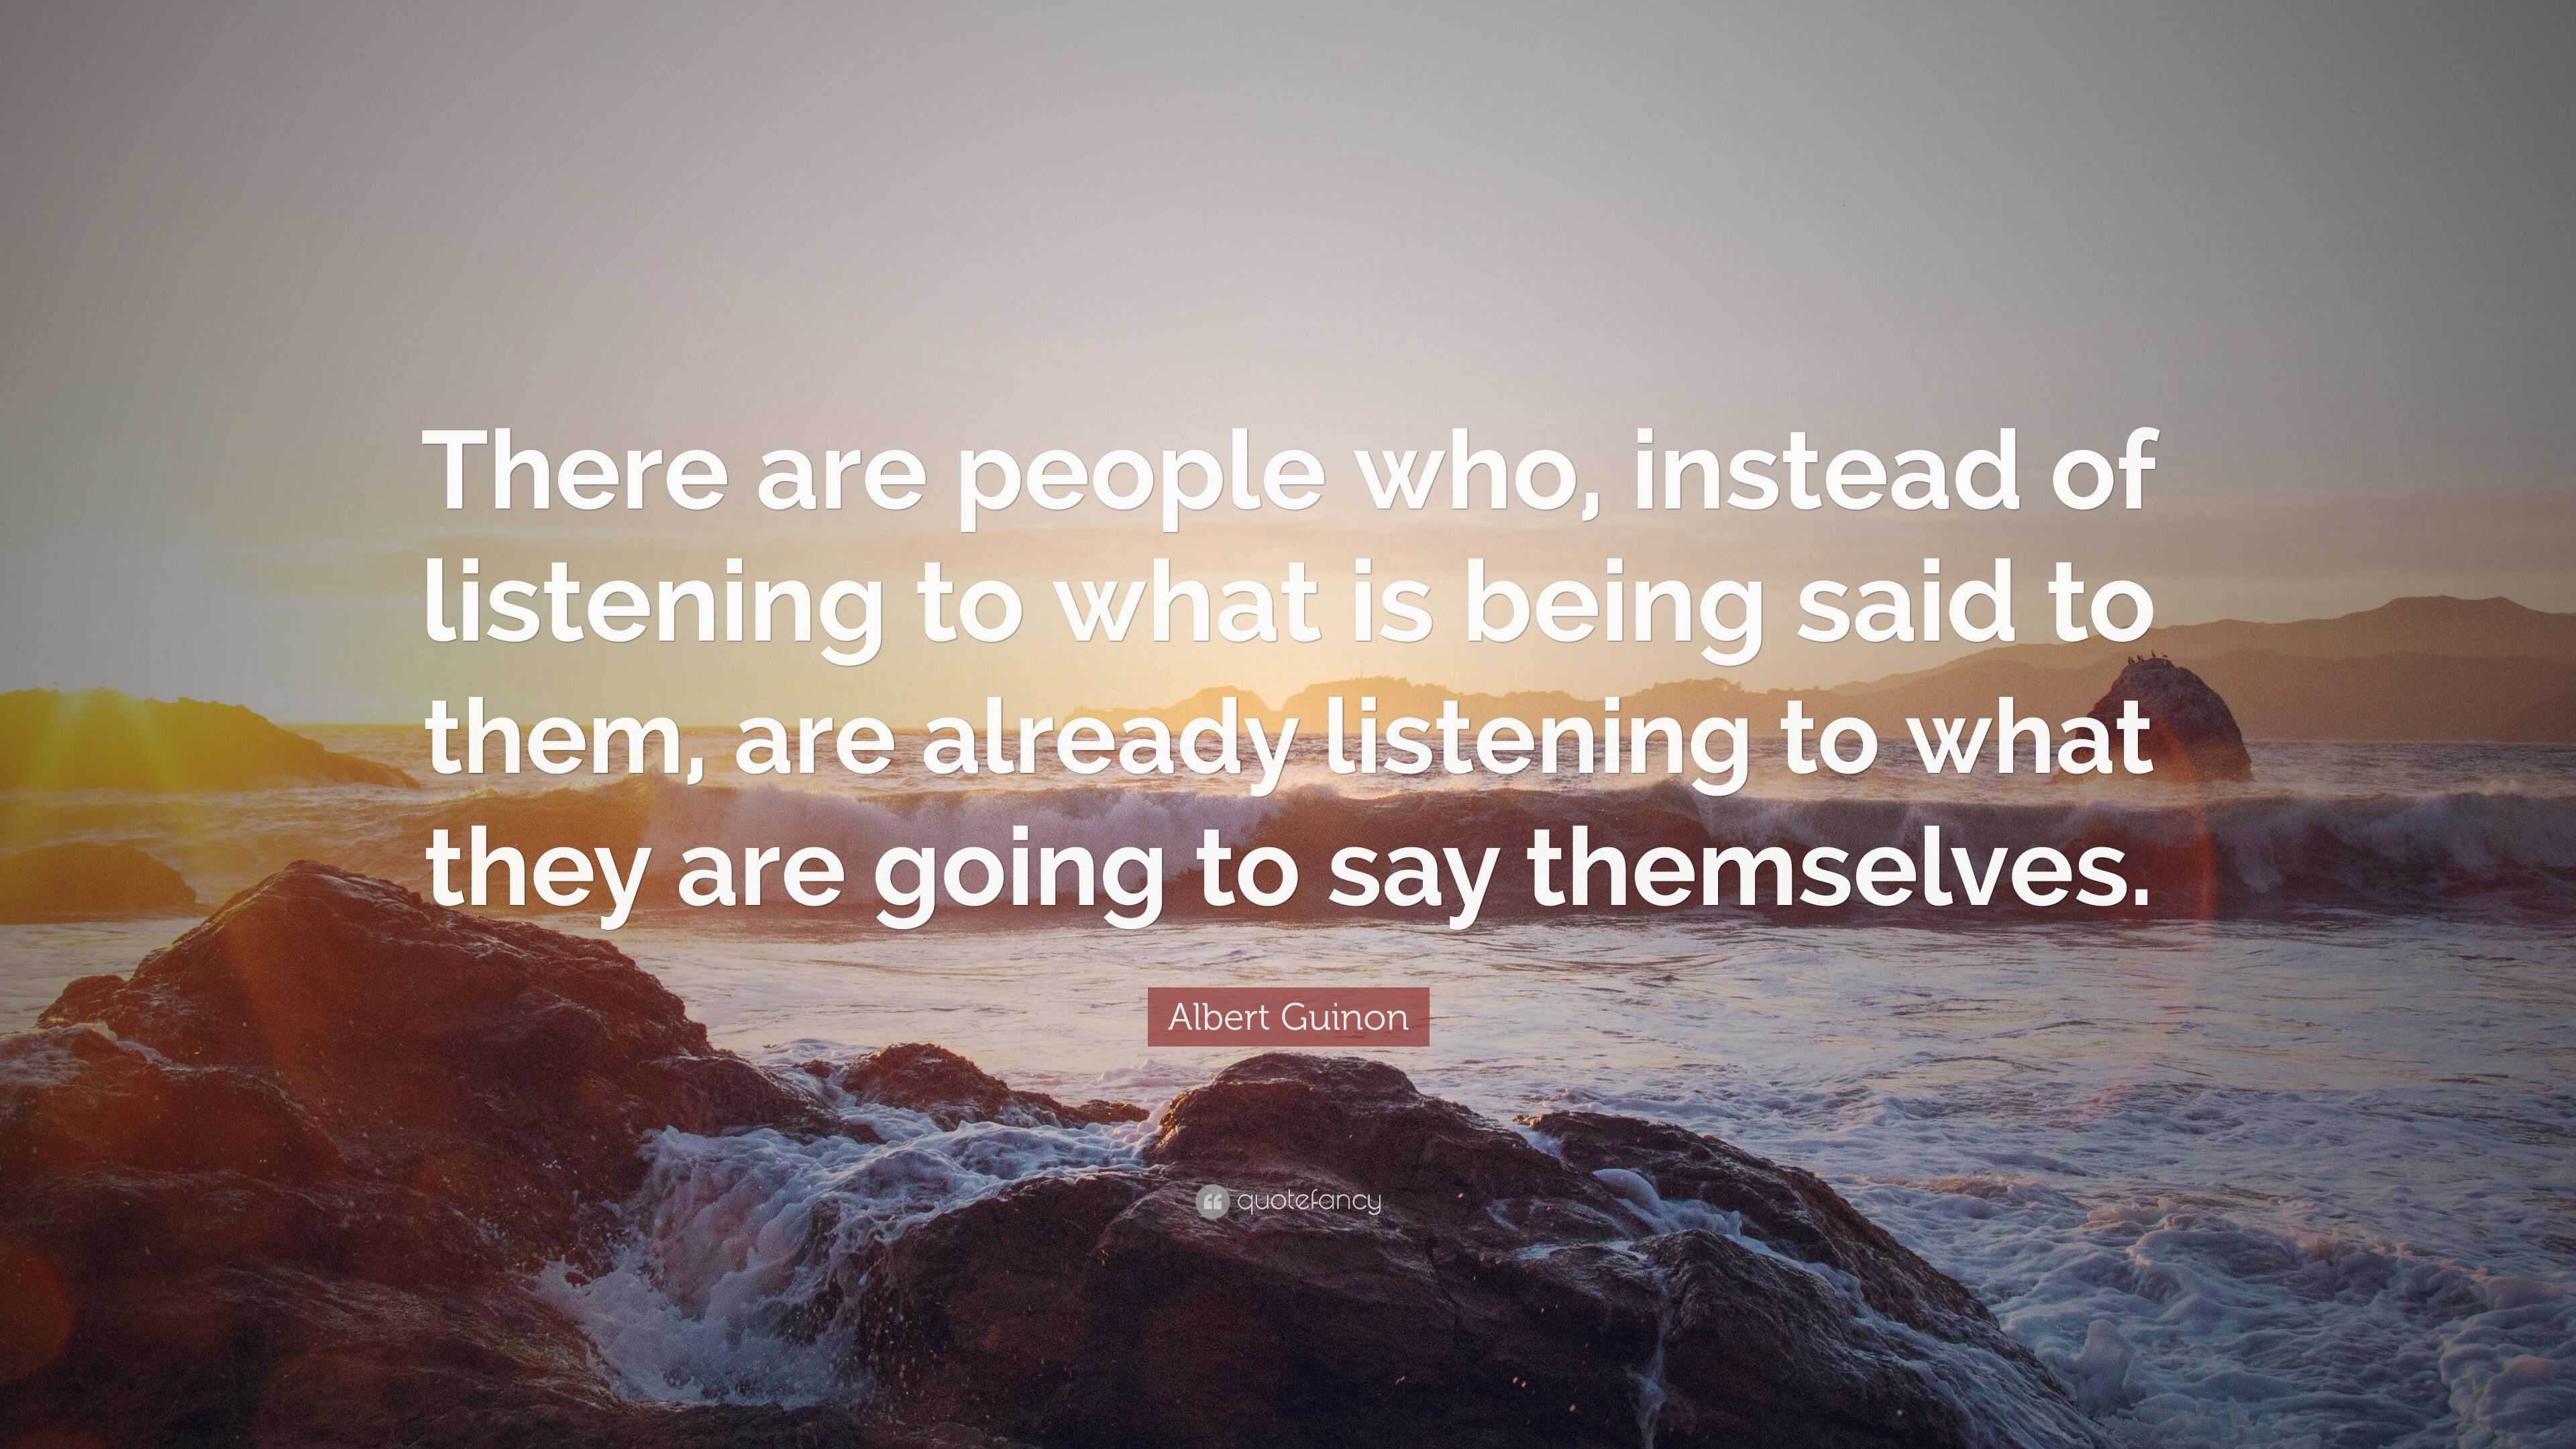 Albert Guinon Quote: “There are people who, instead of listening to ...